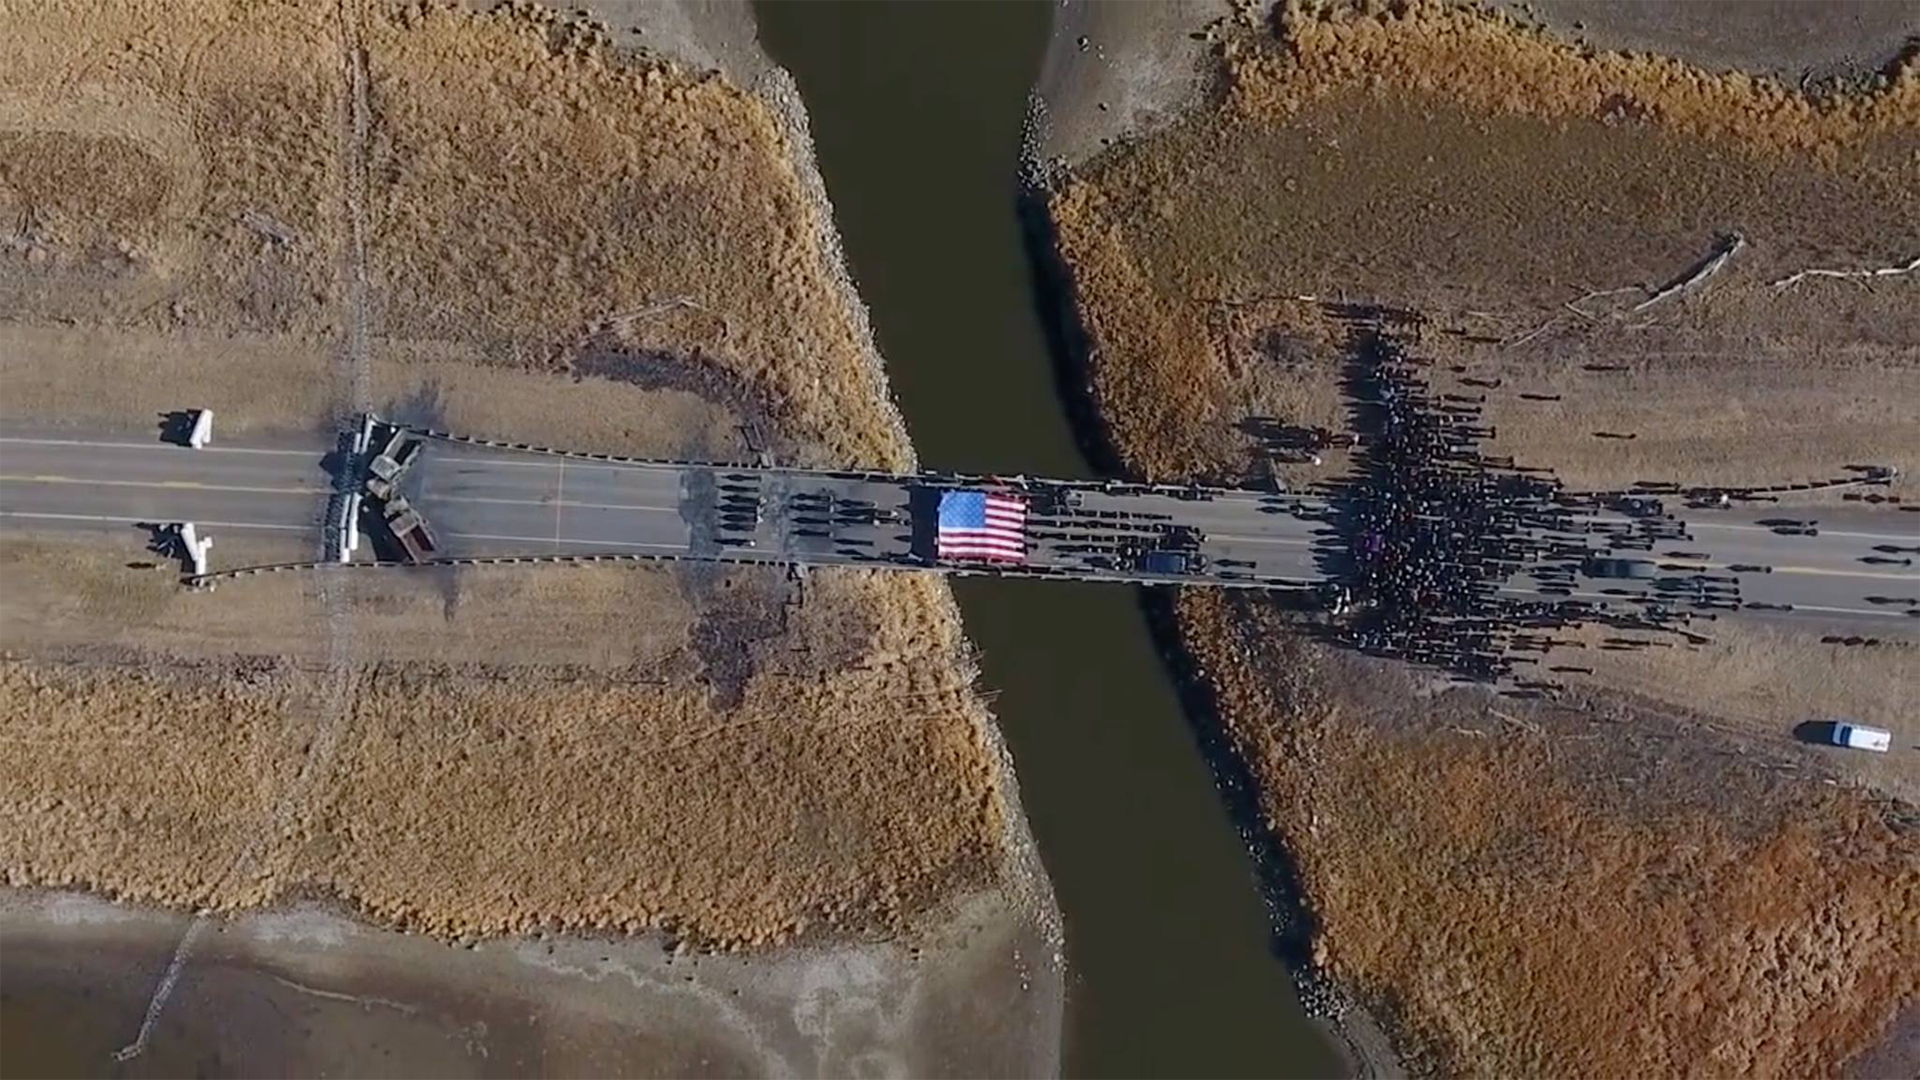 The Backwater Bridge on Highway 1806 over Cantapeda Creek. Water Protectors during a peaceful prayer ceremony in front of the police brigade. Image from the film AWAKE: A DREAM FROM STANDING ROCK captured by Myron Dewey